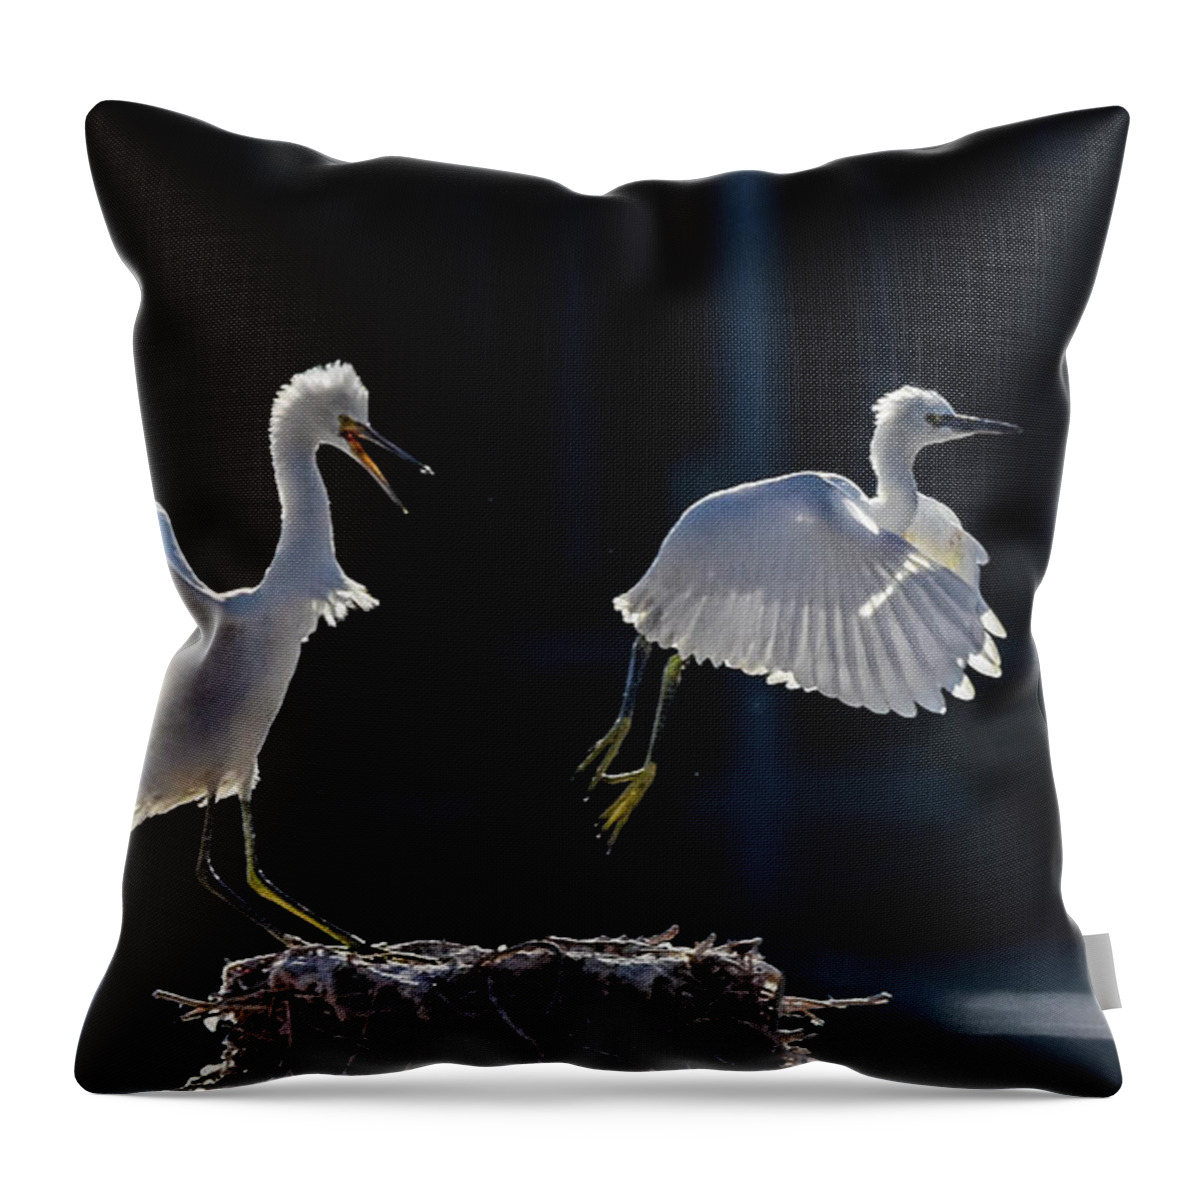 Snowy White Egret Throw Pillow featuring the photograph Snowy White Egrets 4 by Rick Mosher